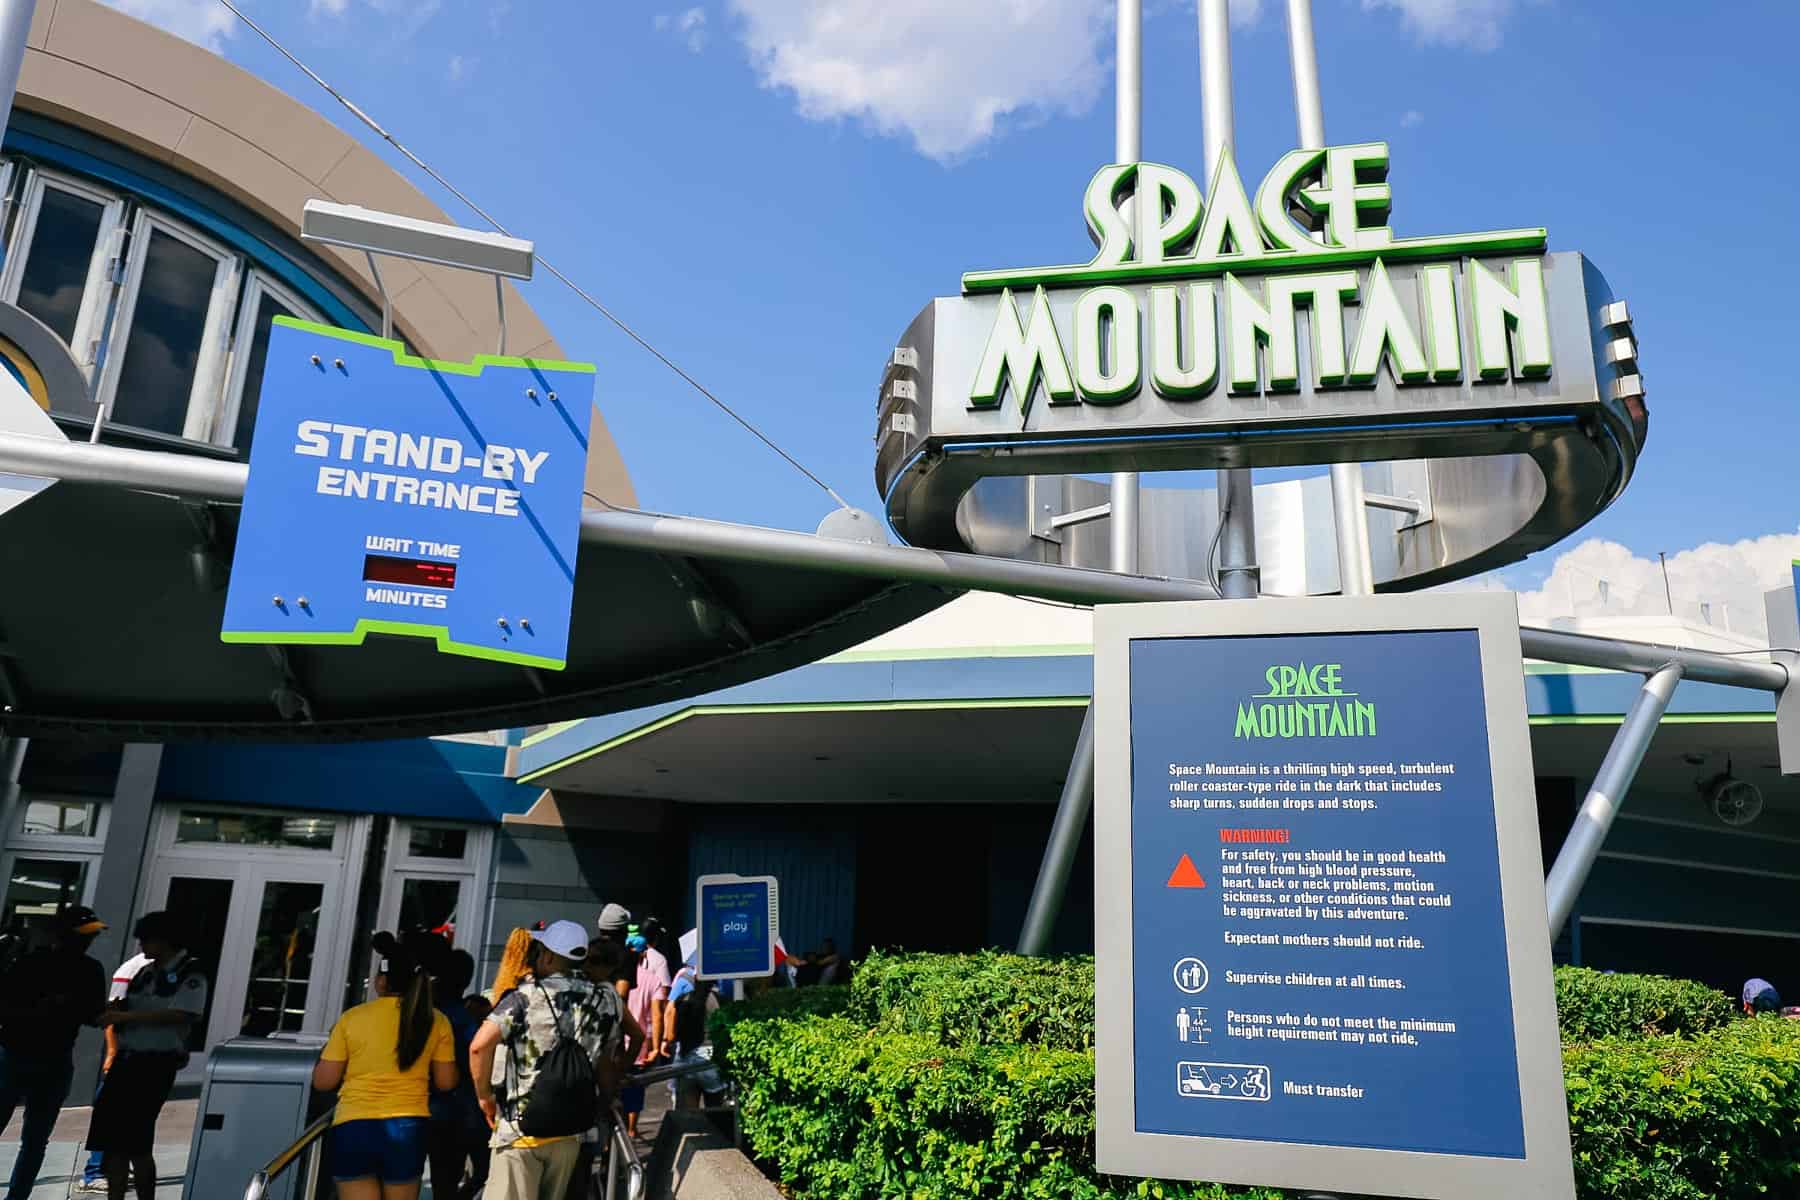 posted ride guidelines for Space Mountain at Magic Kingdom 